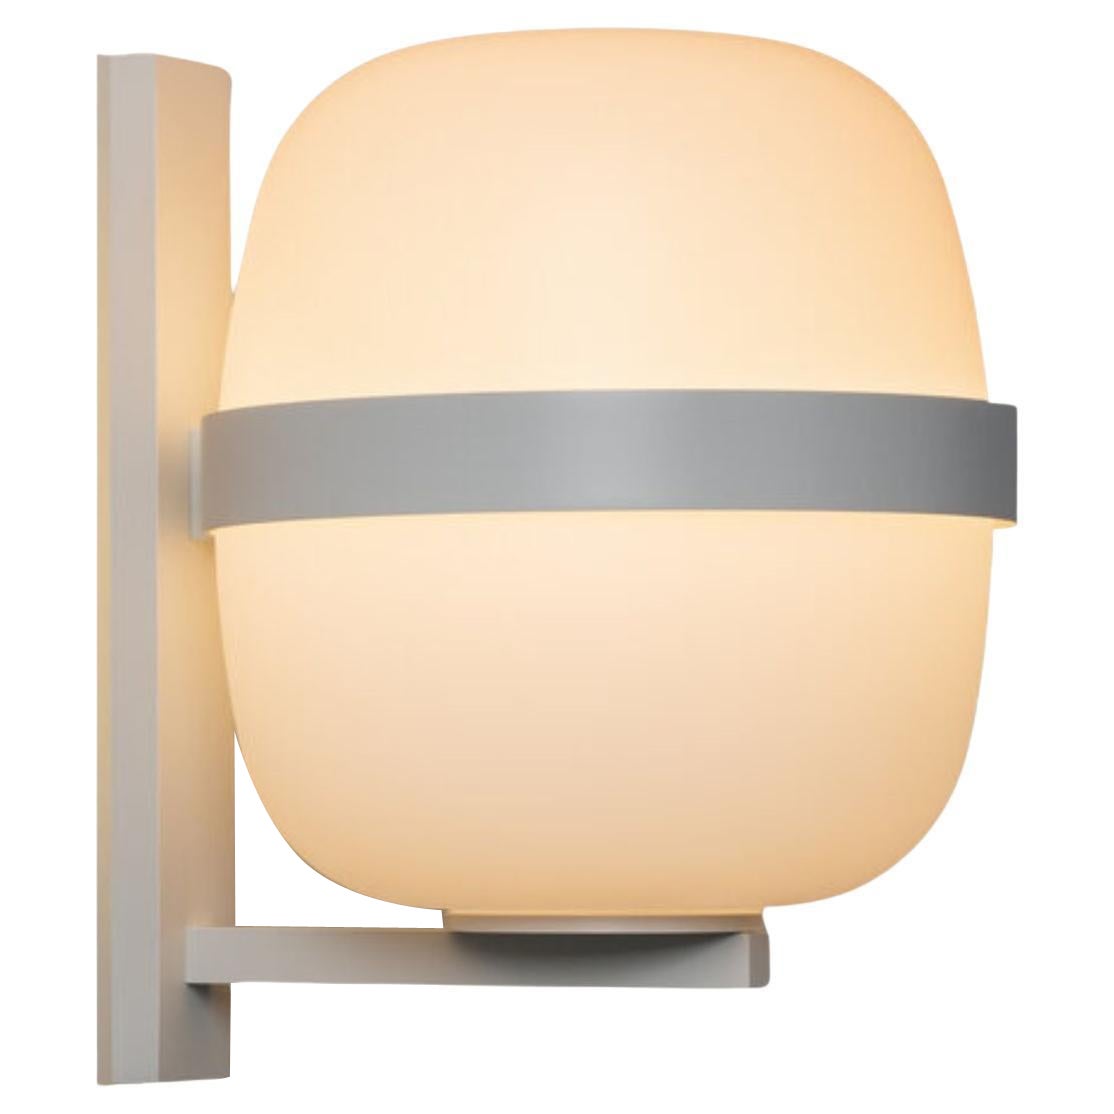 Miguel Milá 'Wally Cesta' Wall Lamp in Opal and White for Santa & Cole For Sale